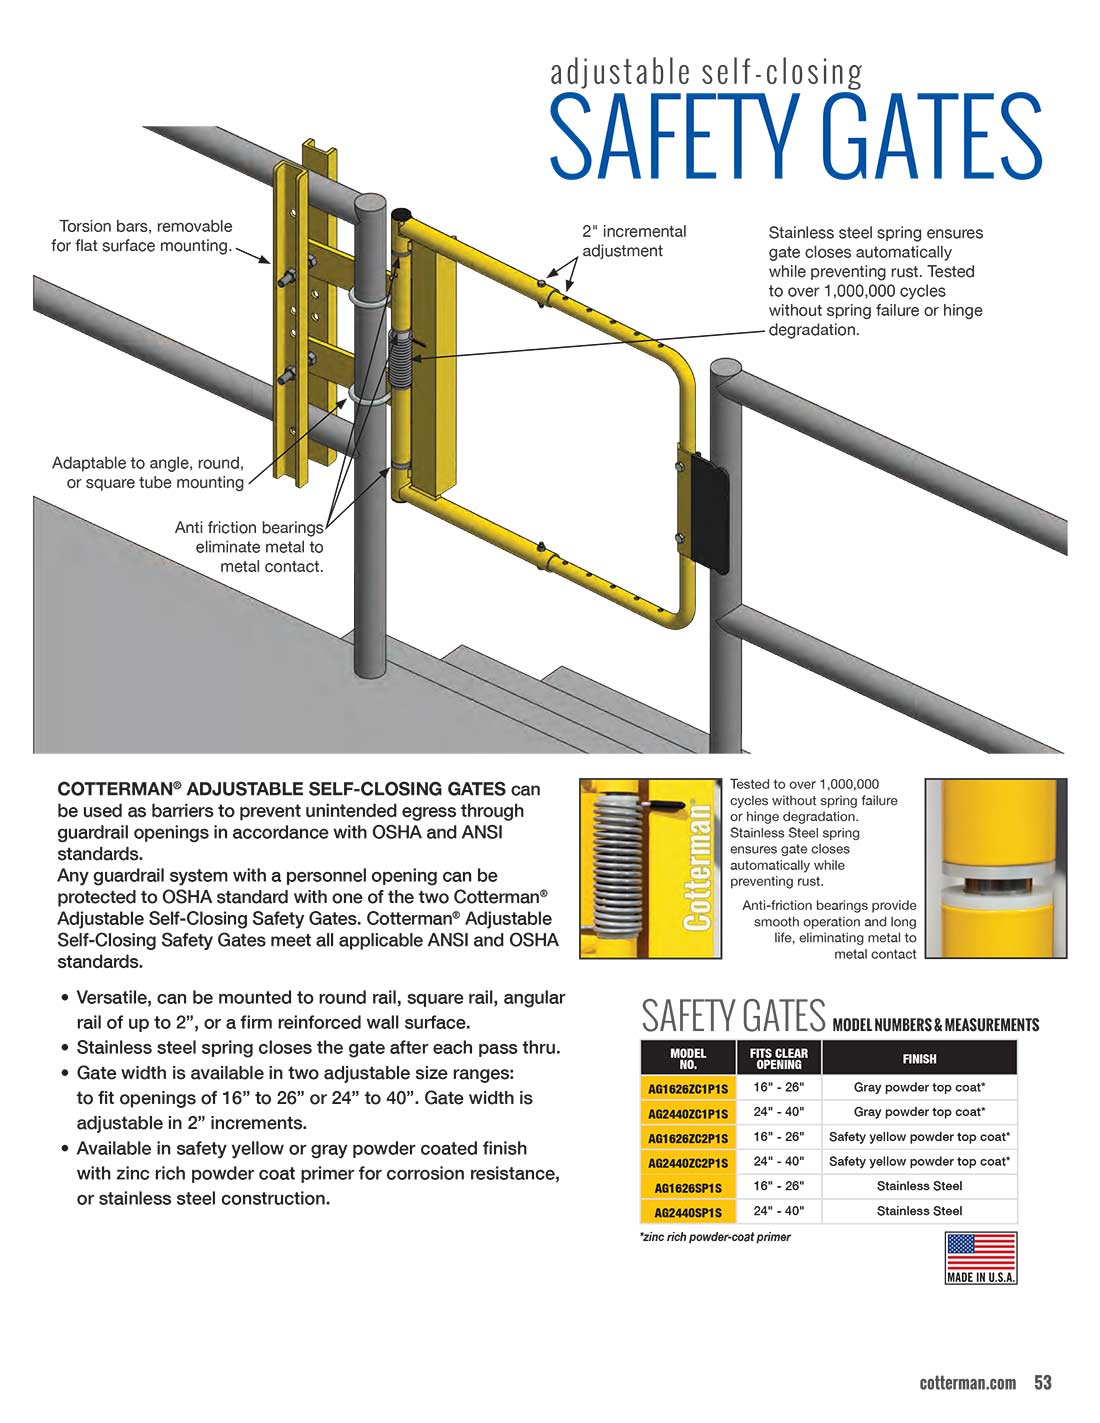 Self-Closing Safety Gate Extended Information 